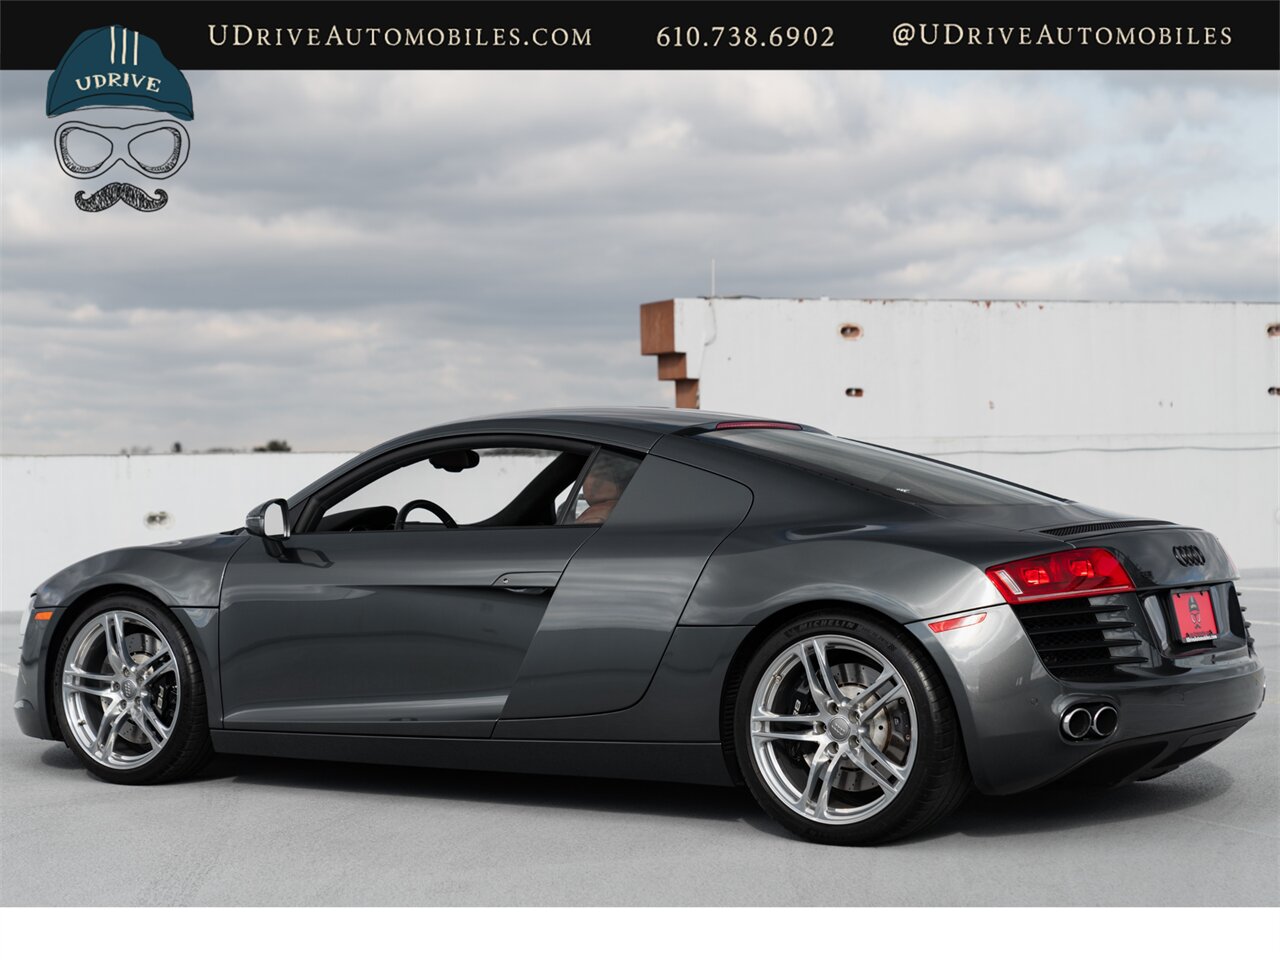 2009 Audi R8 Quattro  4.2 V8 6 Speed Manual 15k Miles - Photo 26 - West Chester, PA 19382